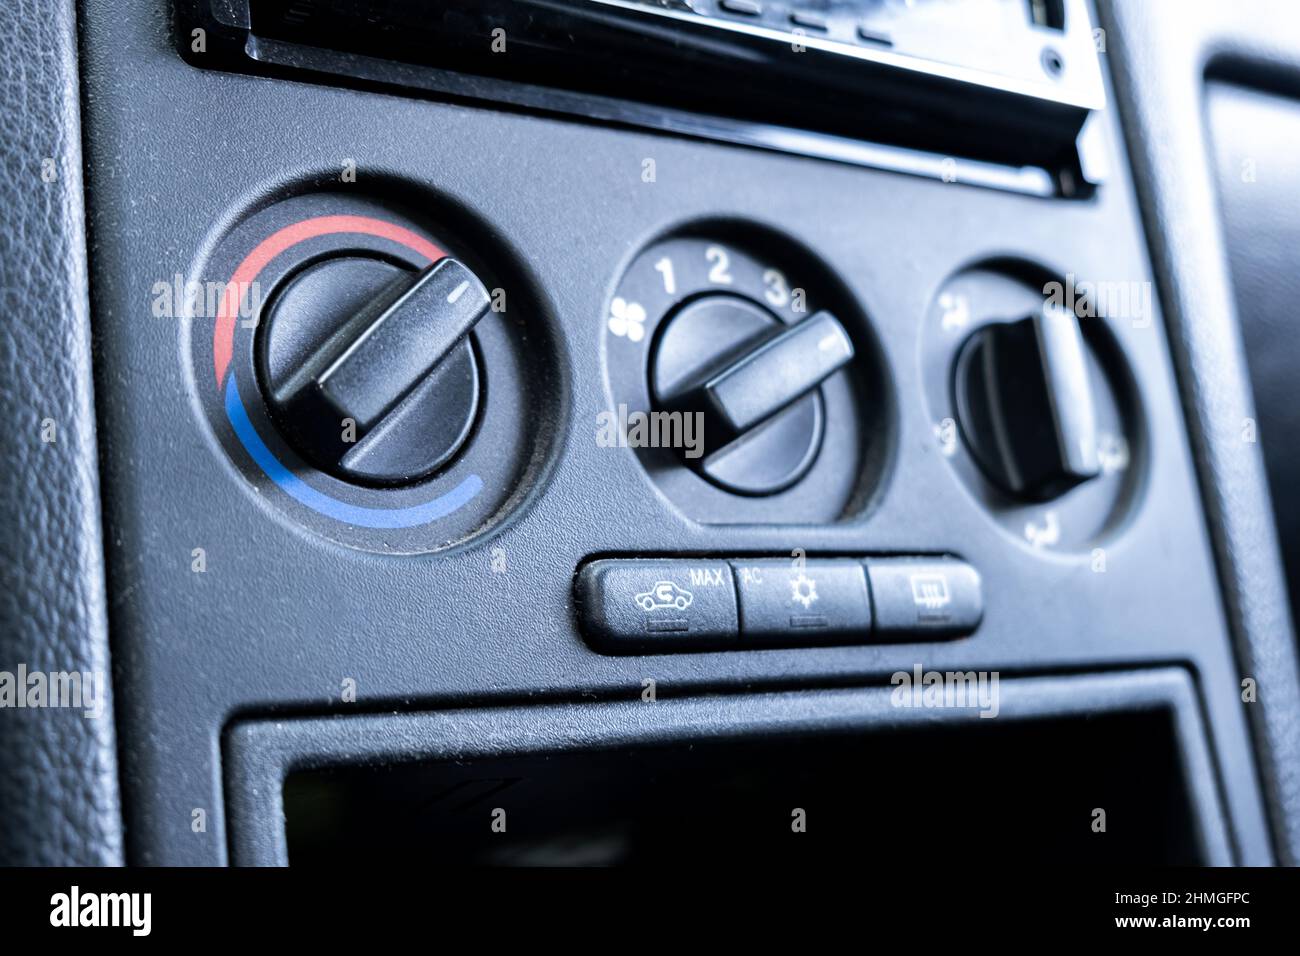 Mechanical control panel for car fan heating, air conditioning. Stock Photo